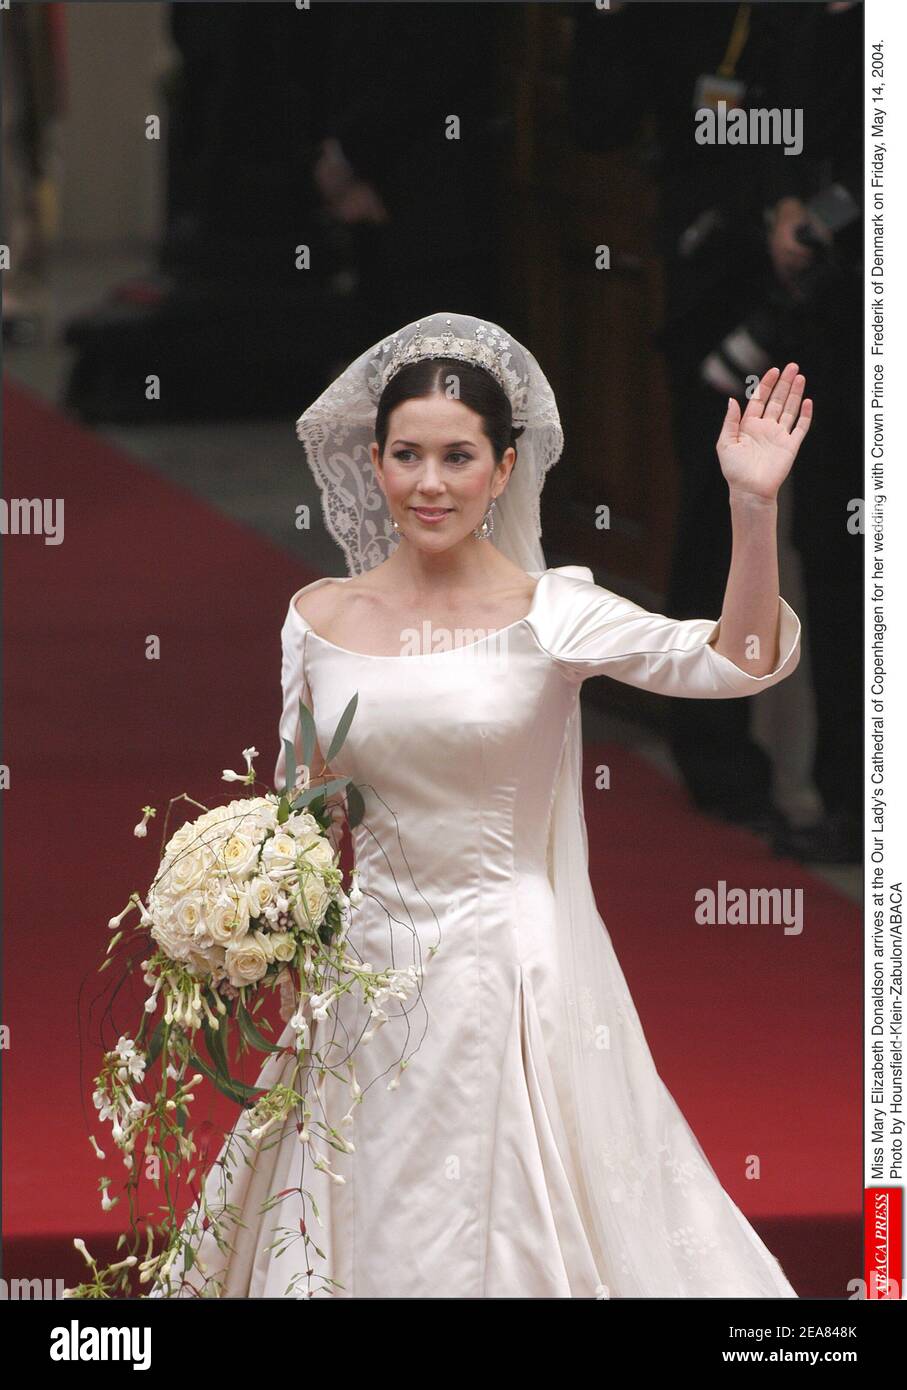 Miss Mary Elizabeth Donaldson arrives at the Our Lady's Cathedral of Copenhagen for her wedding with Crown Prince Frederik of Denmark on Friday, May 14, 2004. Photo by Hounsfield-Klein-Zabulon/ABACA Stock Photo